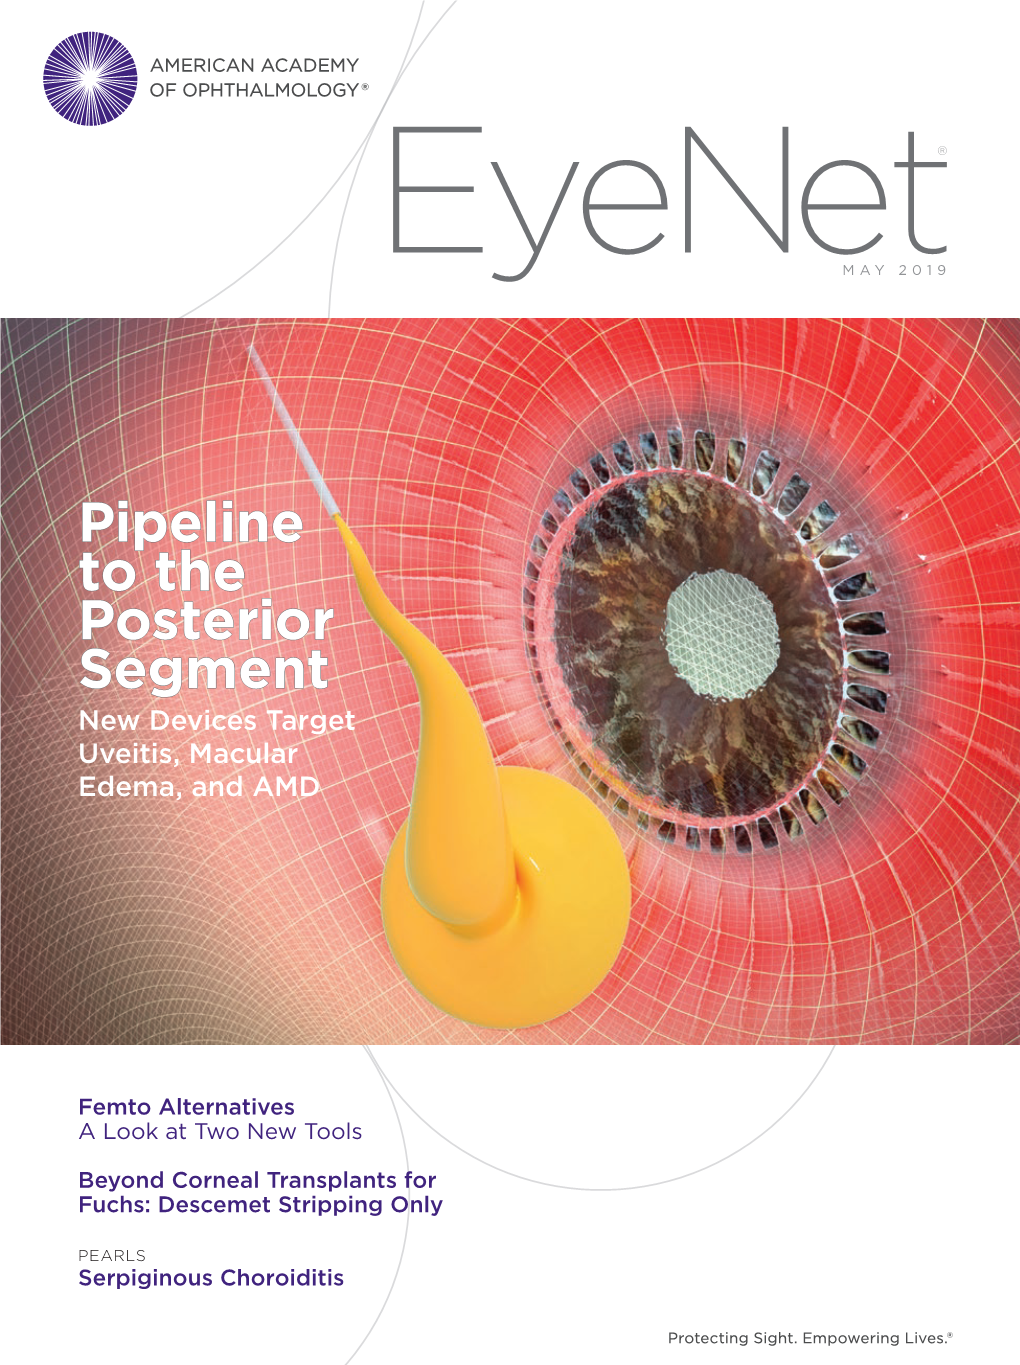 Pipeline to the Posterior Segment New Devices Target Uveitis, Macular Edema, and AMD